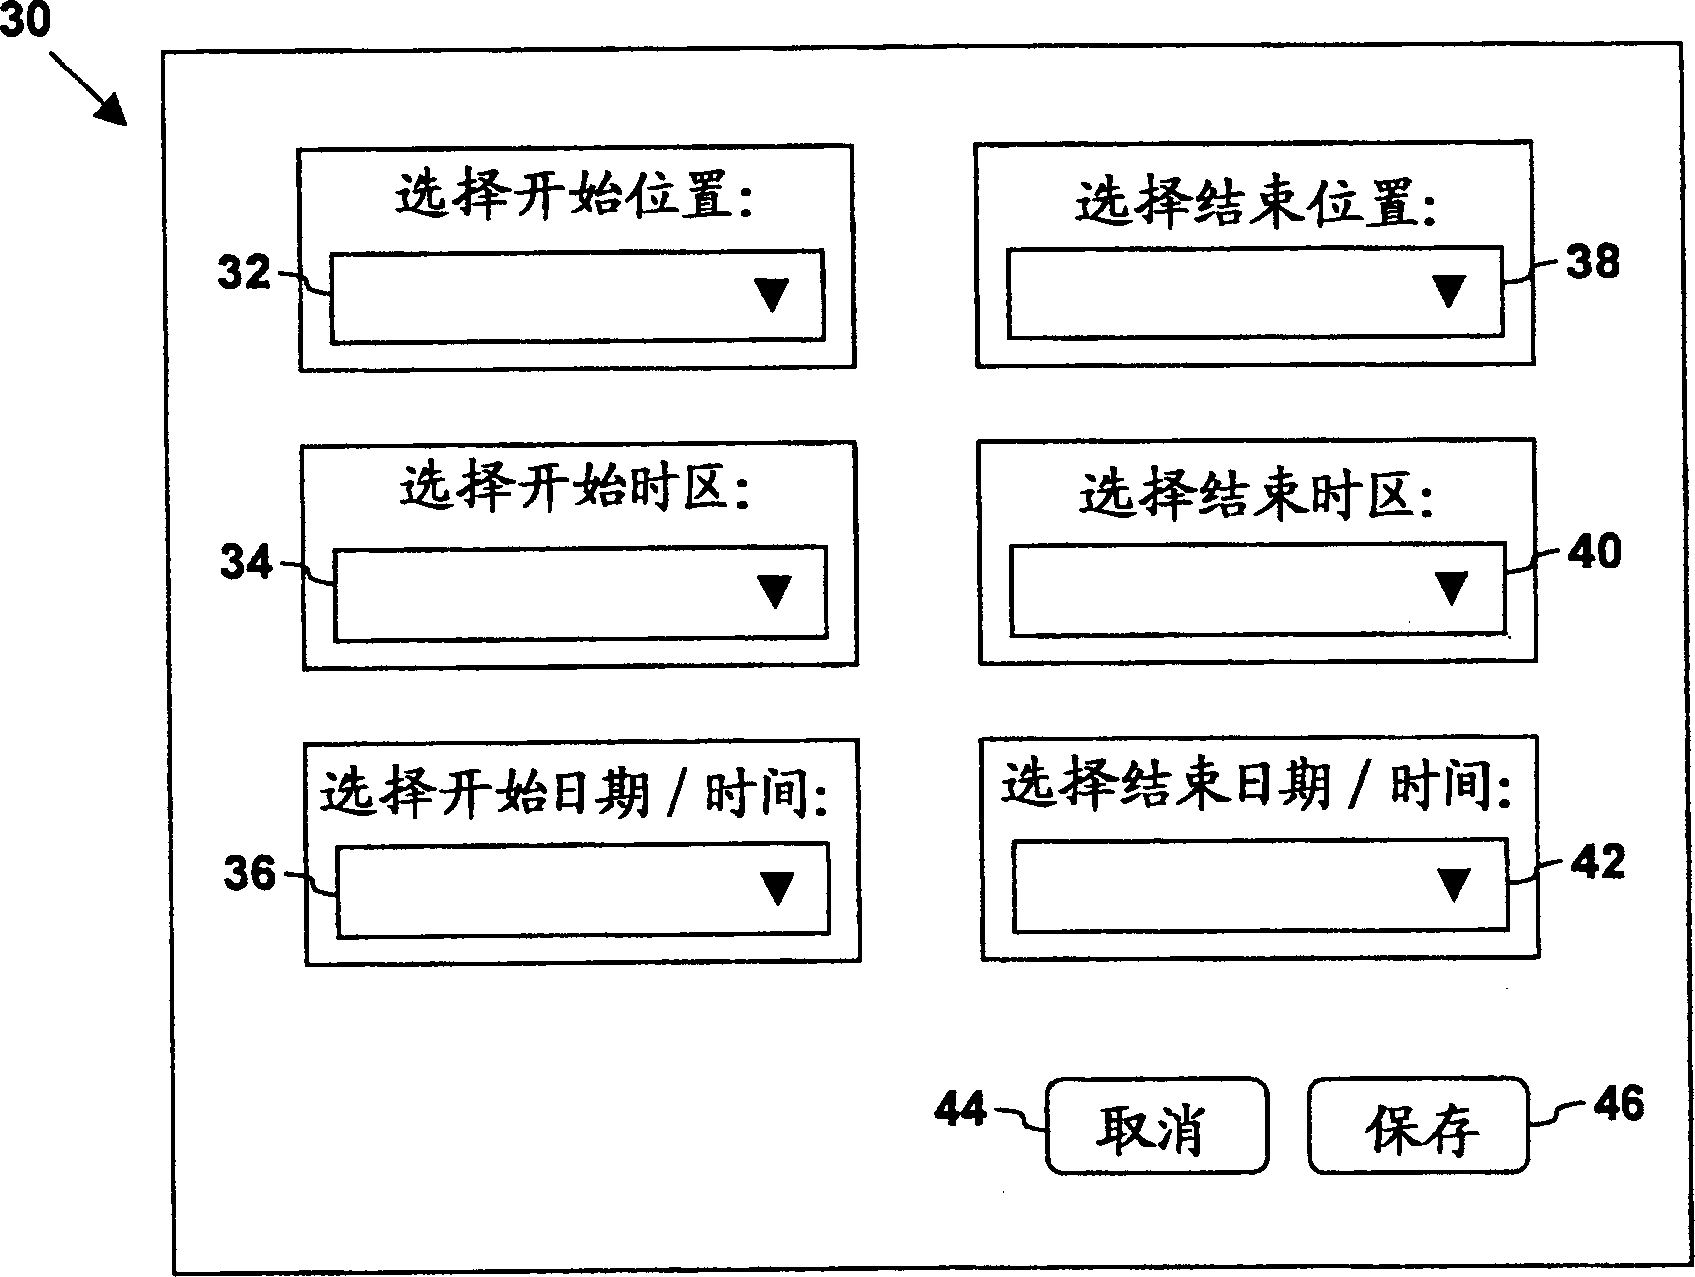 Method and system for conveying a changing local time zone in an electronic calendar